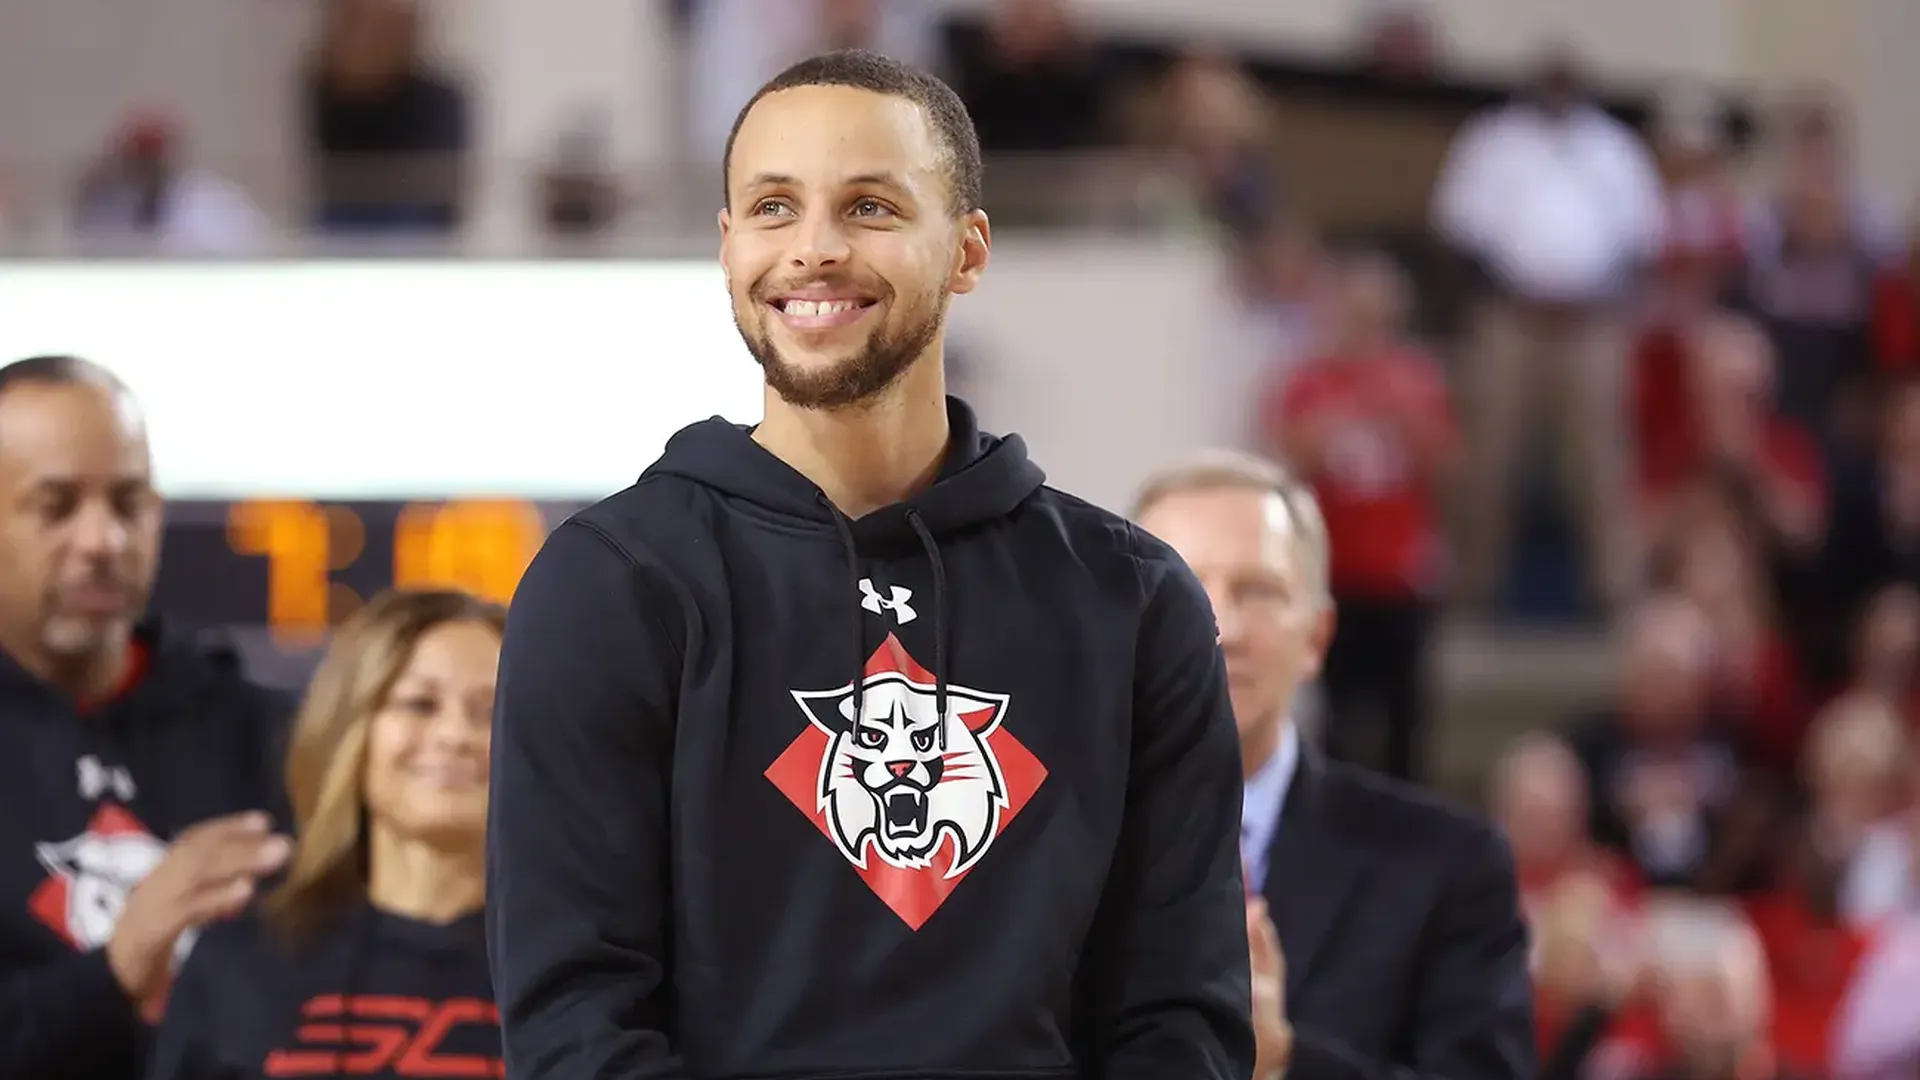 DAVIDSON, NC - JANUARY 24: Stephen Curry #30 of the Golden State Warriors smiles on the court during the ceremony to name the student section after him at Davidson's John M. Belk Area after him at Davidson College on January 24, 2017 in Davidson, North Carolina. NOTE TO USER: User expressly acknowle